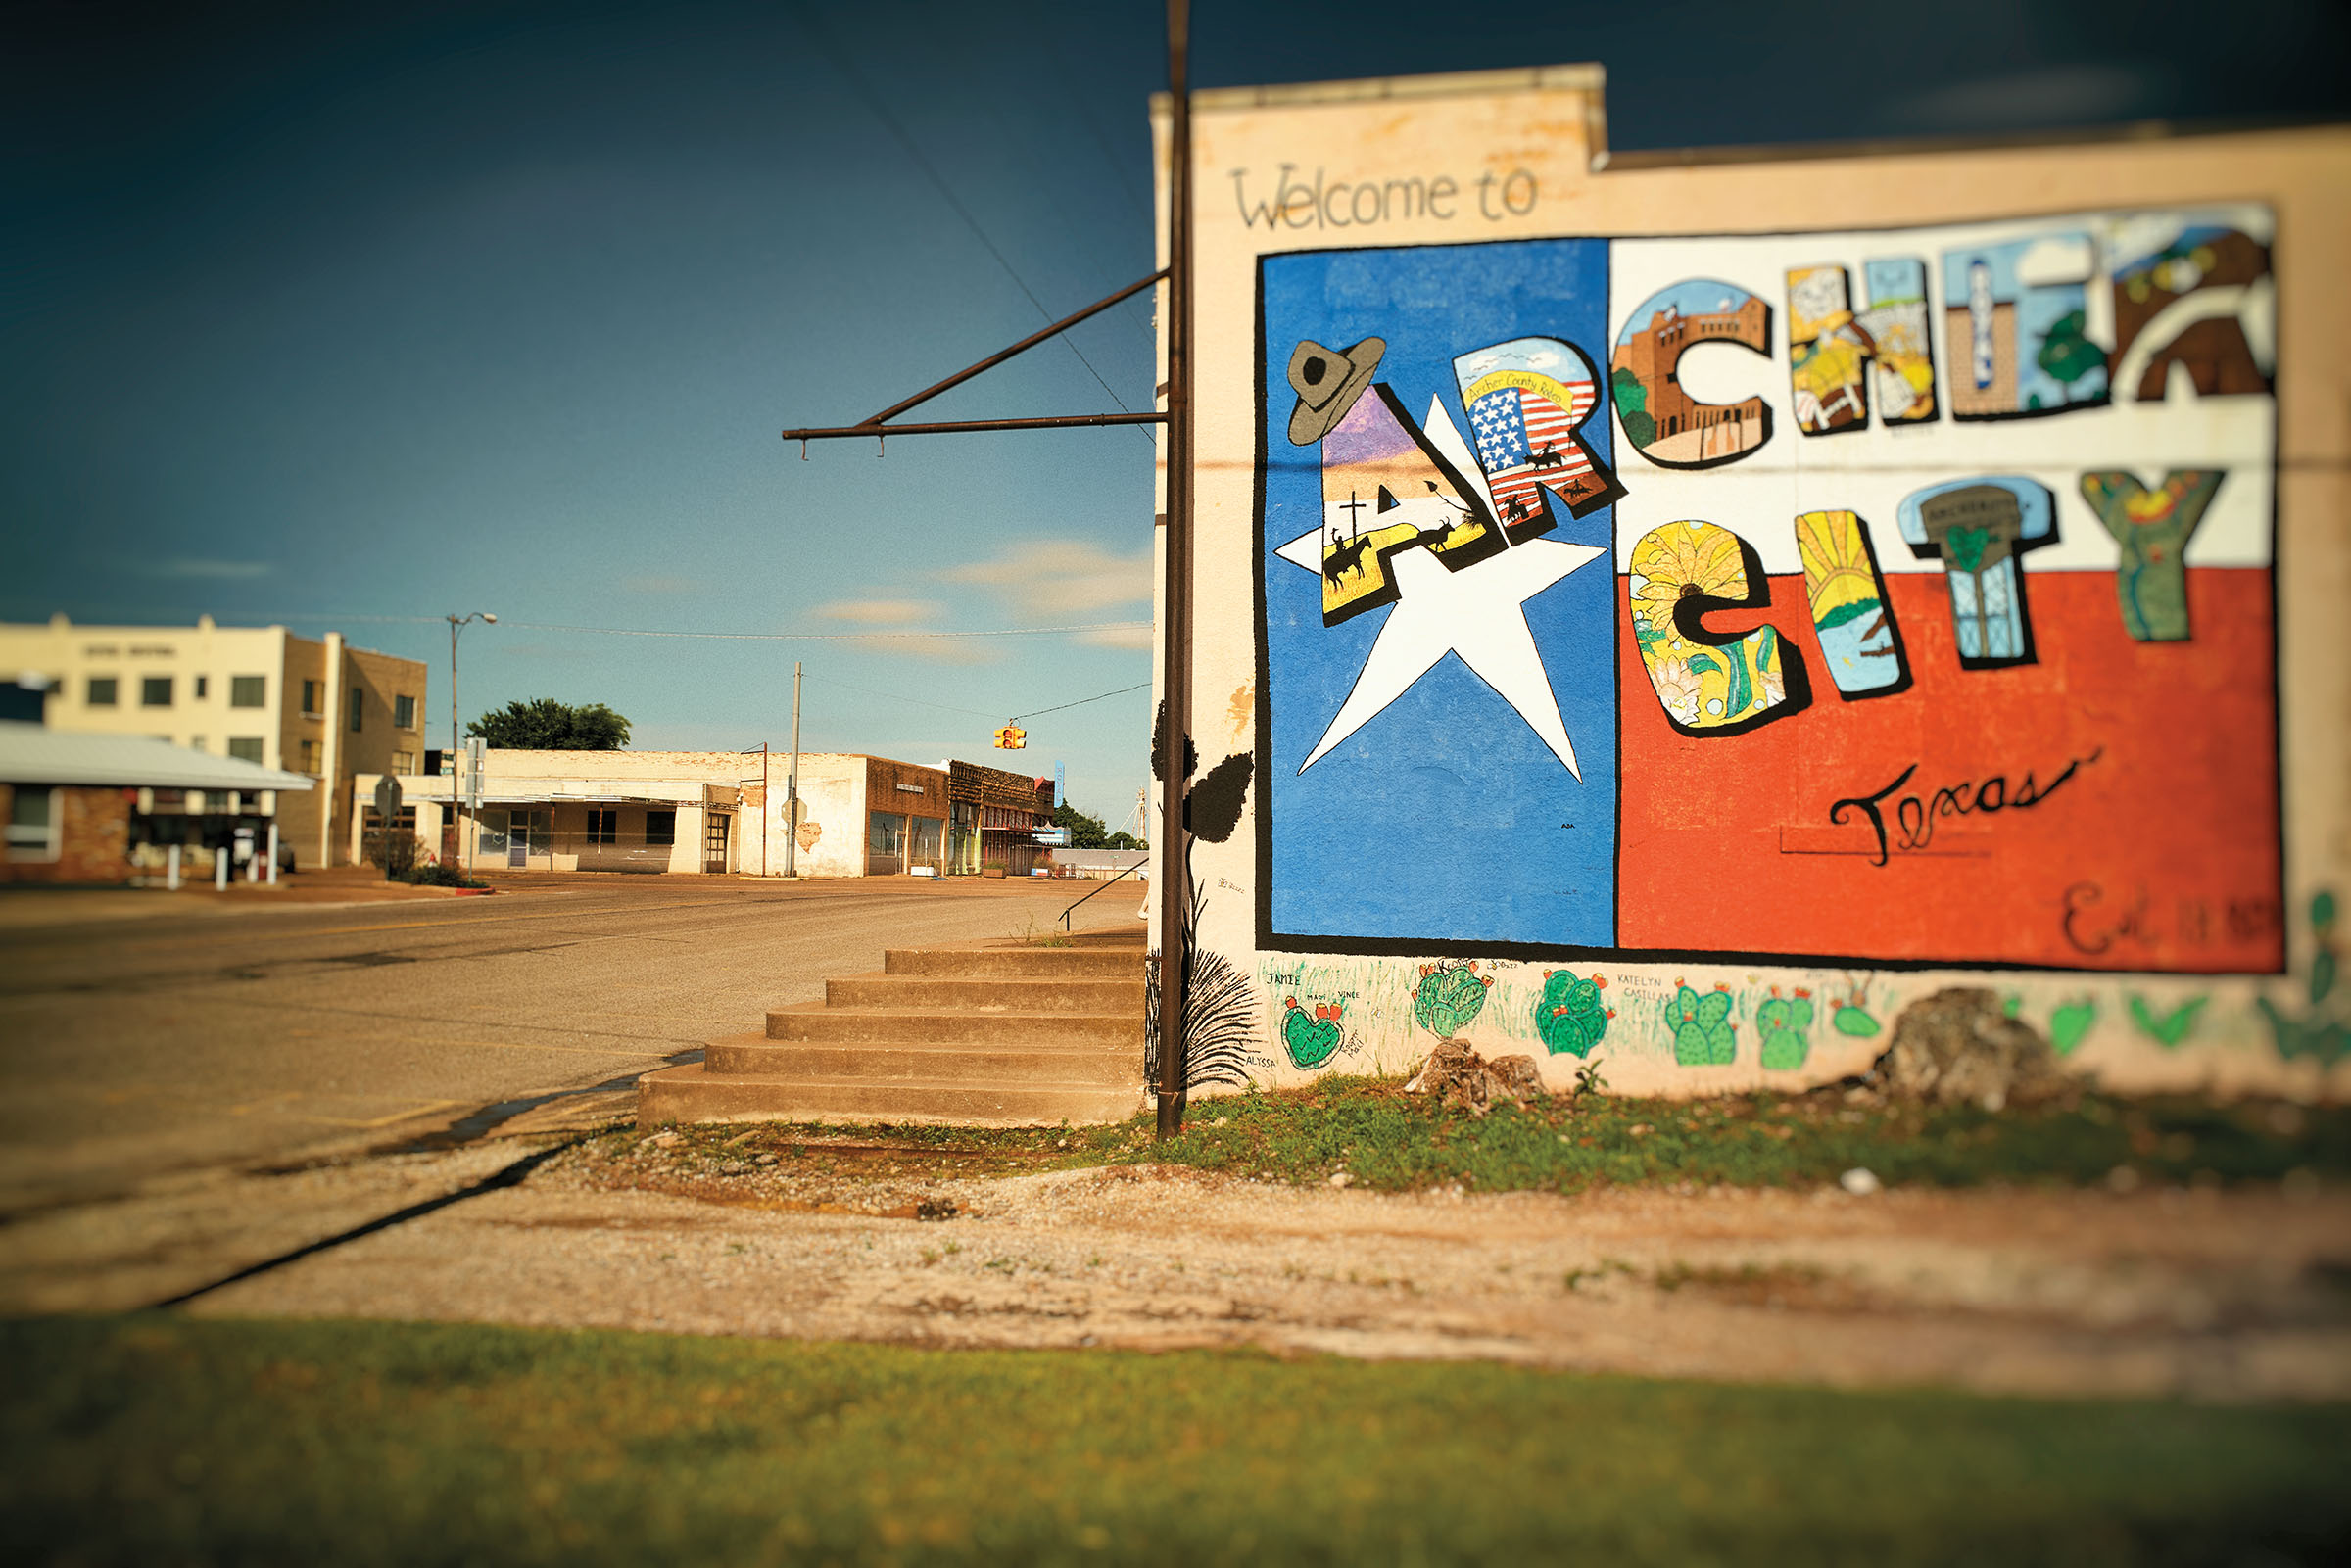 A Texas-flag themed mural reading "Archer City" on the side of a tan building